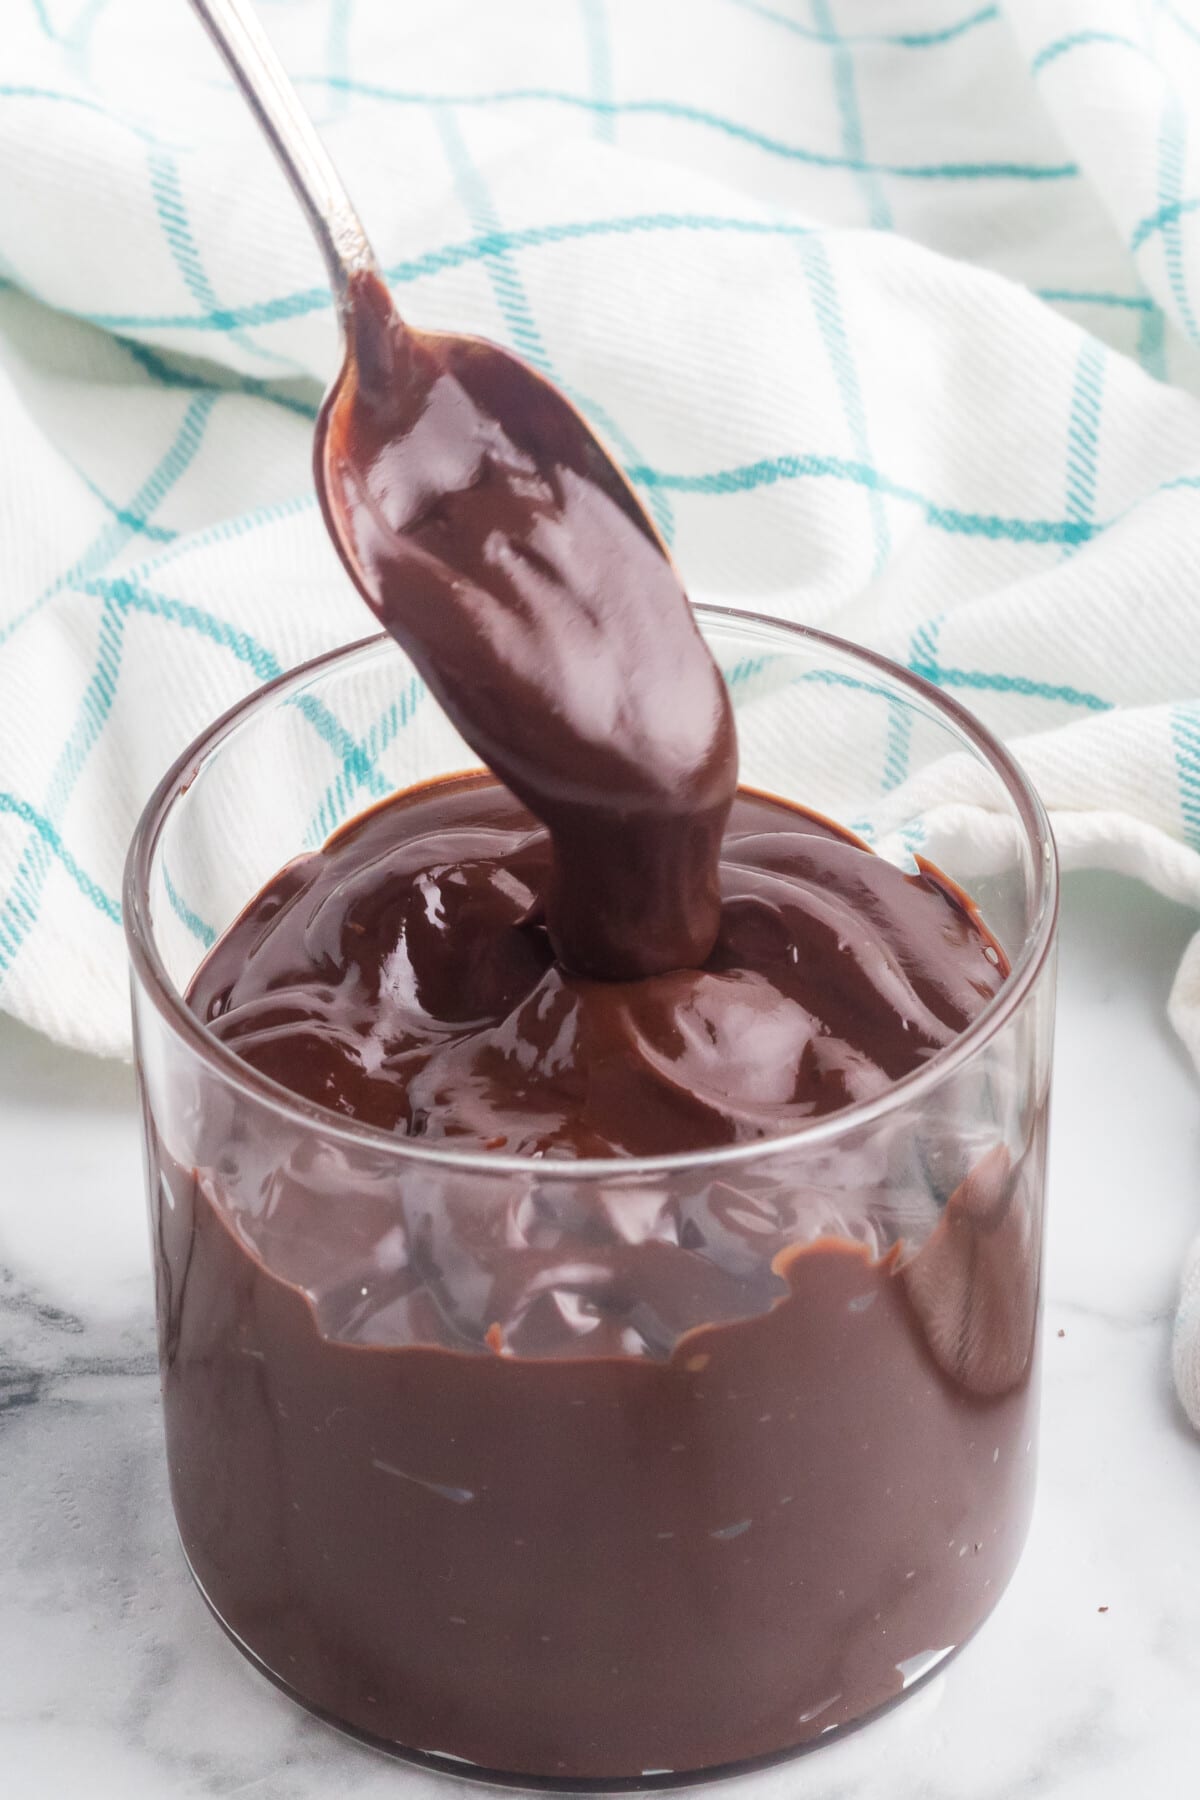 Spoon being dipped into chocolate ganache